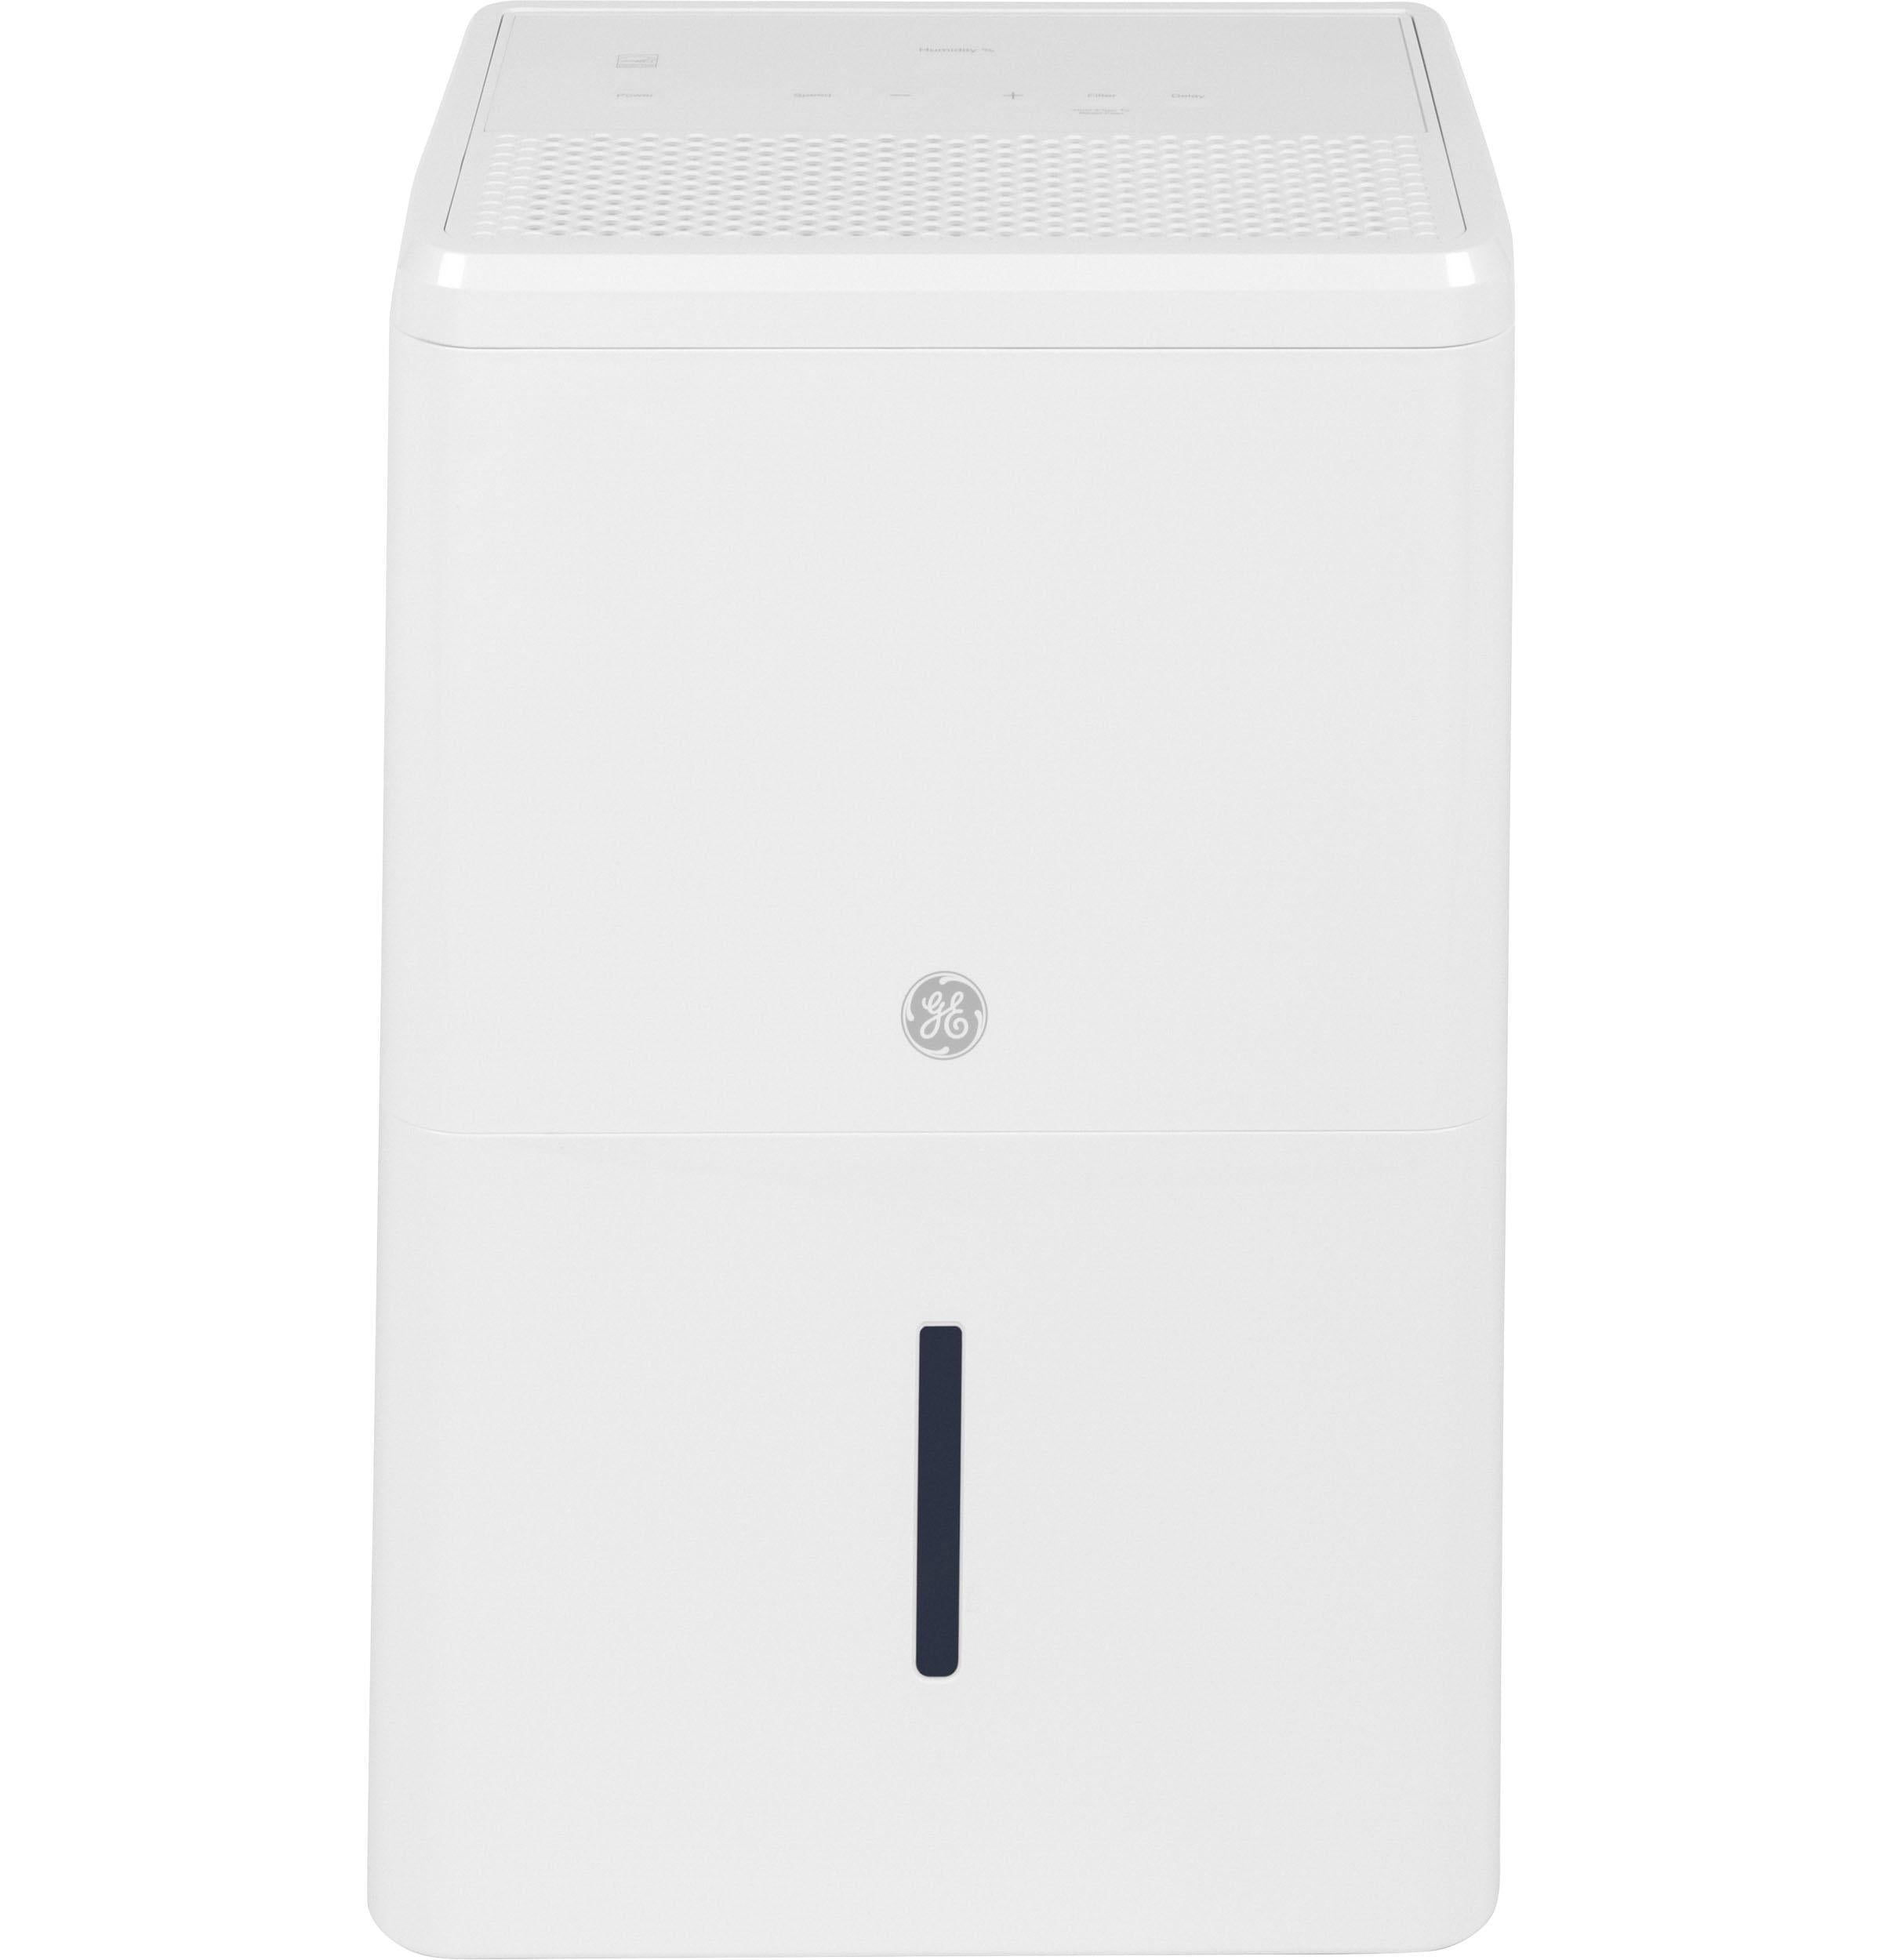 GE® ENERGY STAR® 35 Pint Portable Dehumidifier with Smart Dry for Very Damp Spaces